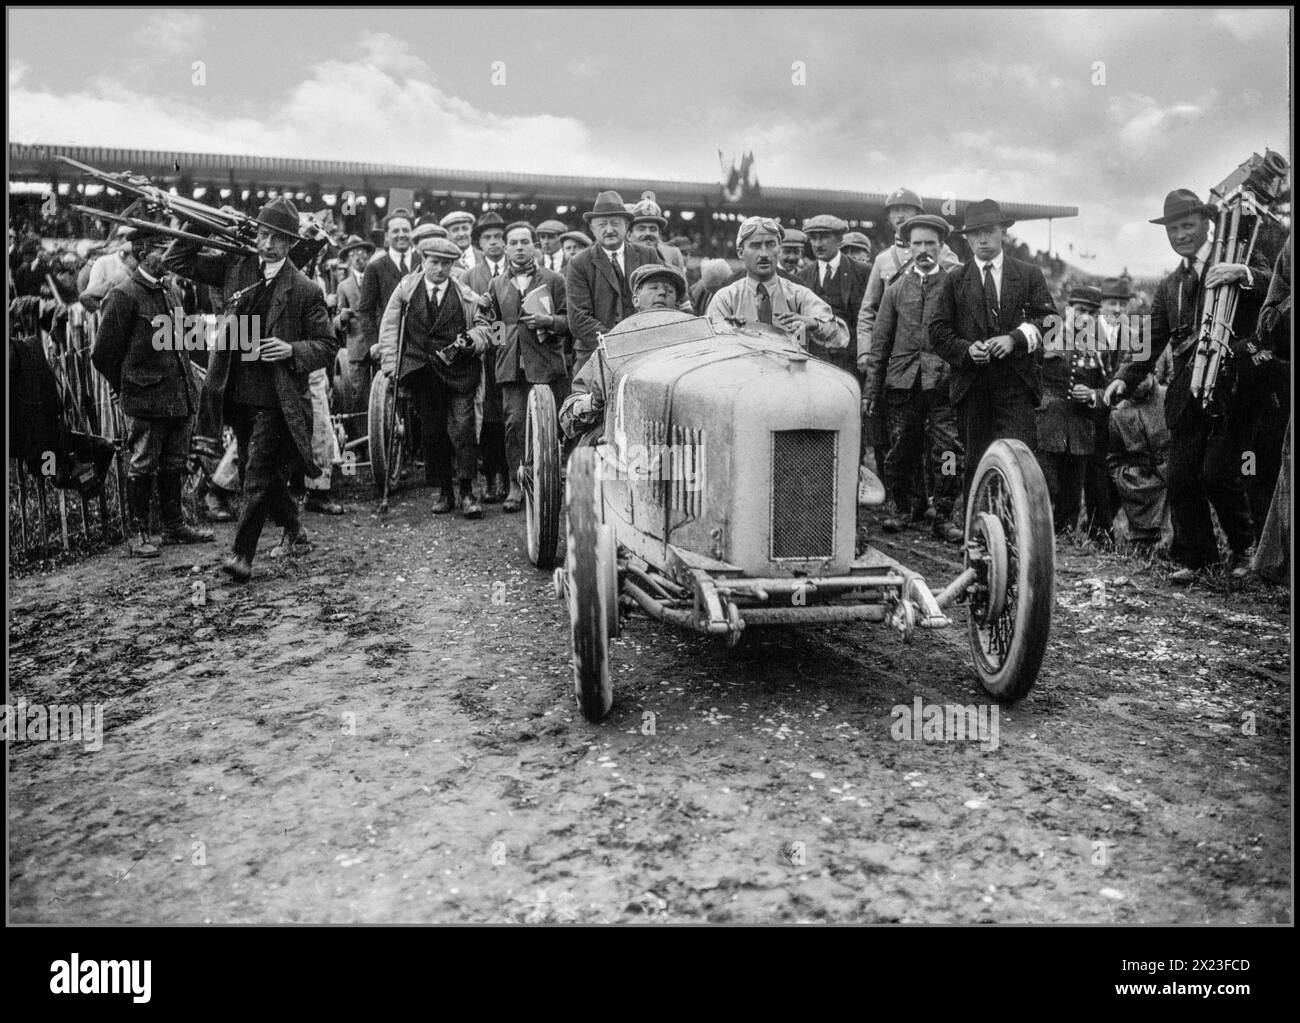 Vintage 1922 French Grand Prix FELICE NAZZARO WIINER at The 1922 French Grand Prix (formally the XVI Grand Prix de l'Automobile Club de France) It was a Grand Prix motor race held at Strasbourg on 15 July 1922. The race was run over 60 laps of the 13.38km circuit for a total distance of just over 800km and was won by Felice Nazzaro driving a Fiat. This race is notable as the first Grand Prix to feature a massed start. Stock Photo